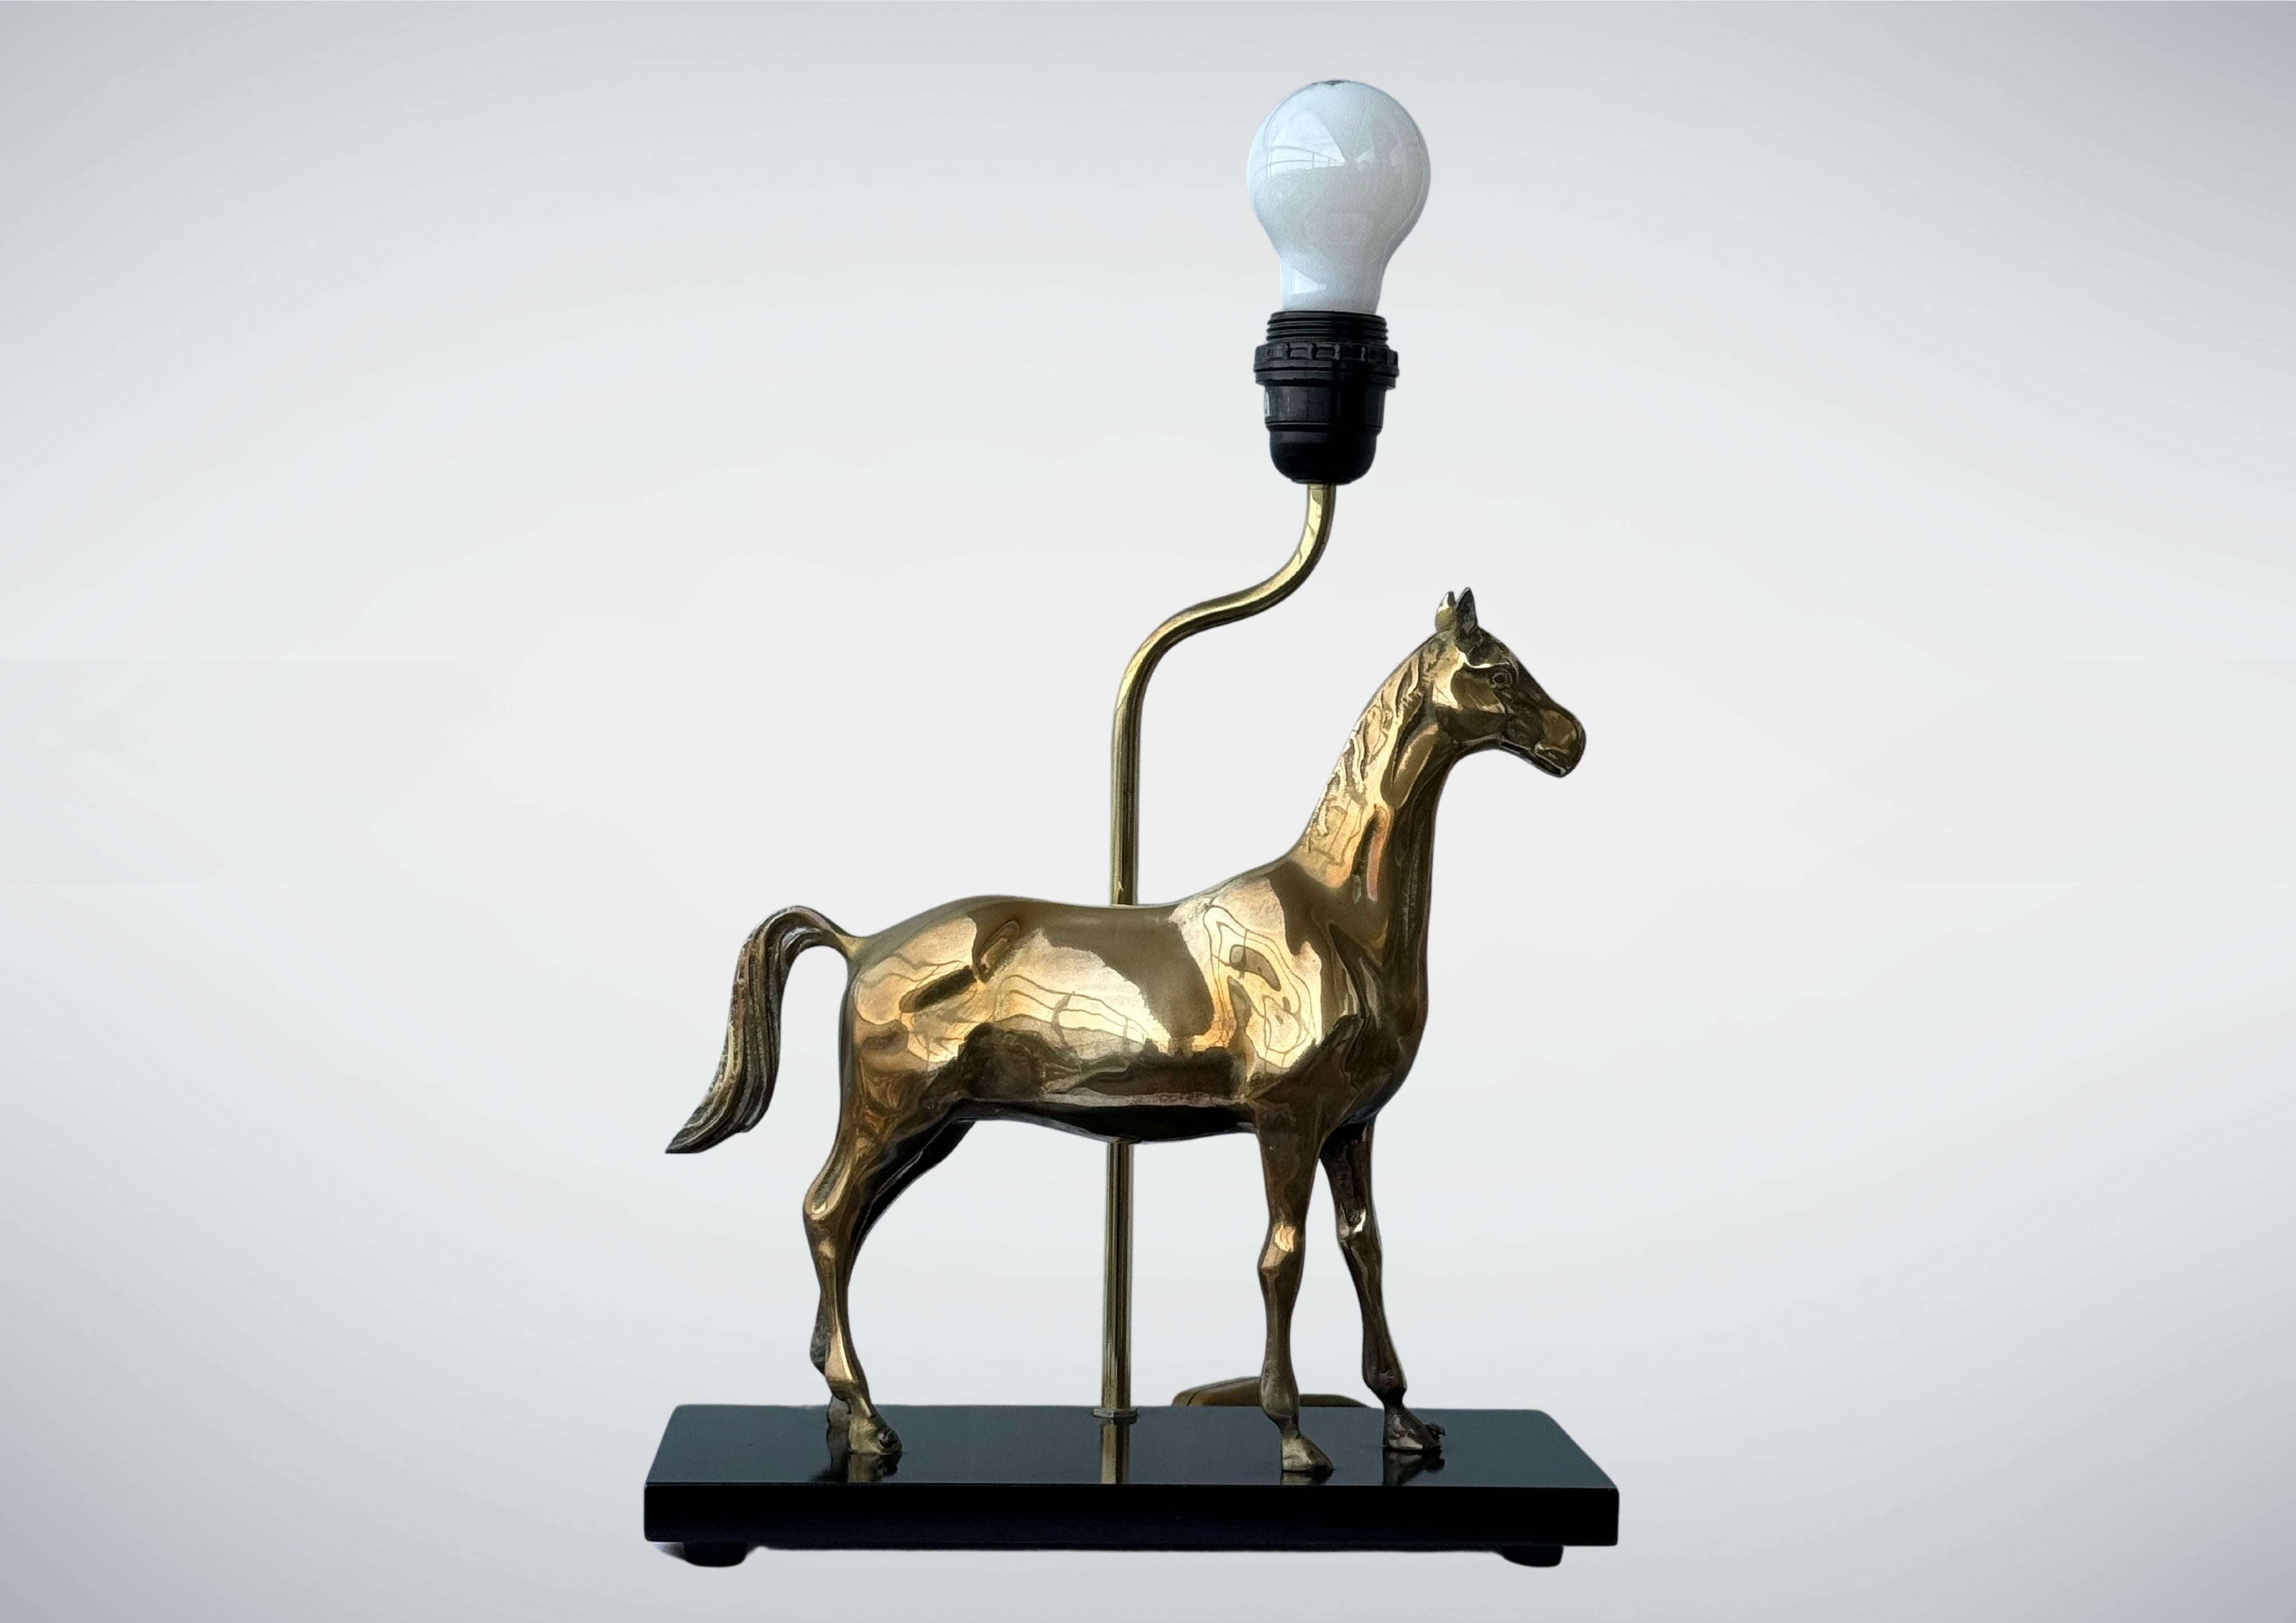 A 1970s brass horse table lamp by Deknudt Belgium
Equestrian themed, depicting an image an elegant stallion.
Mounted on a sleek black lacquered platform.
Solid brass gorgeous horse sculpture, very charming.
Beautifully finished.
The horse sculpture